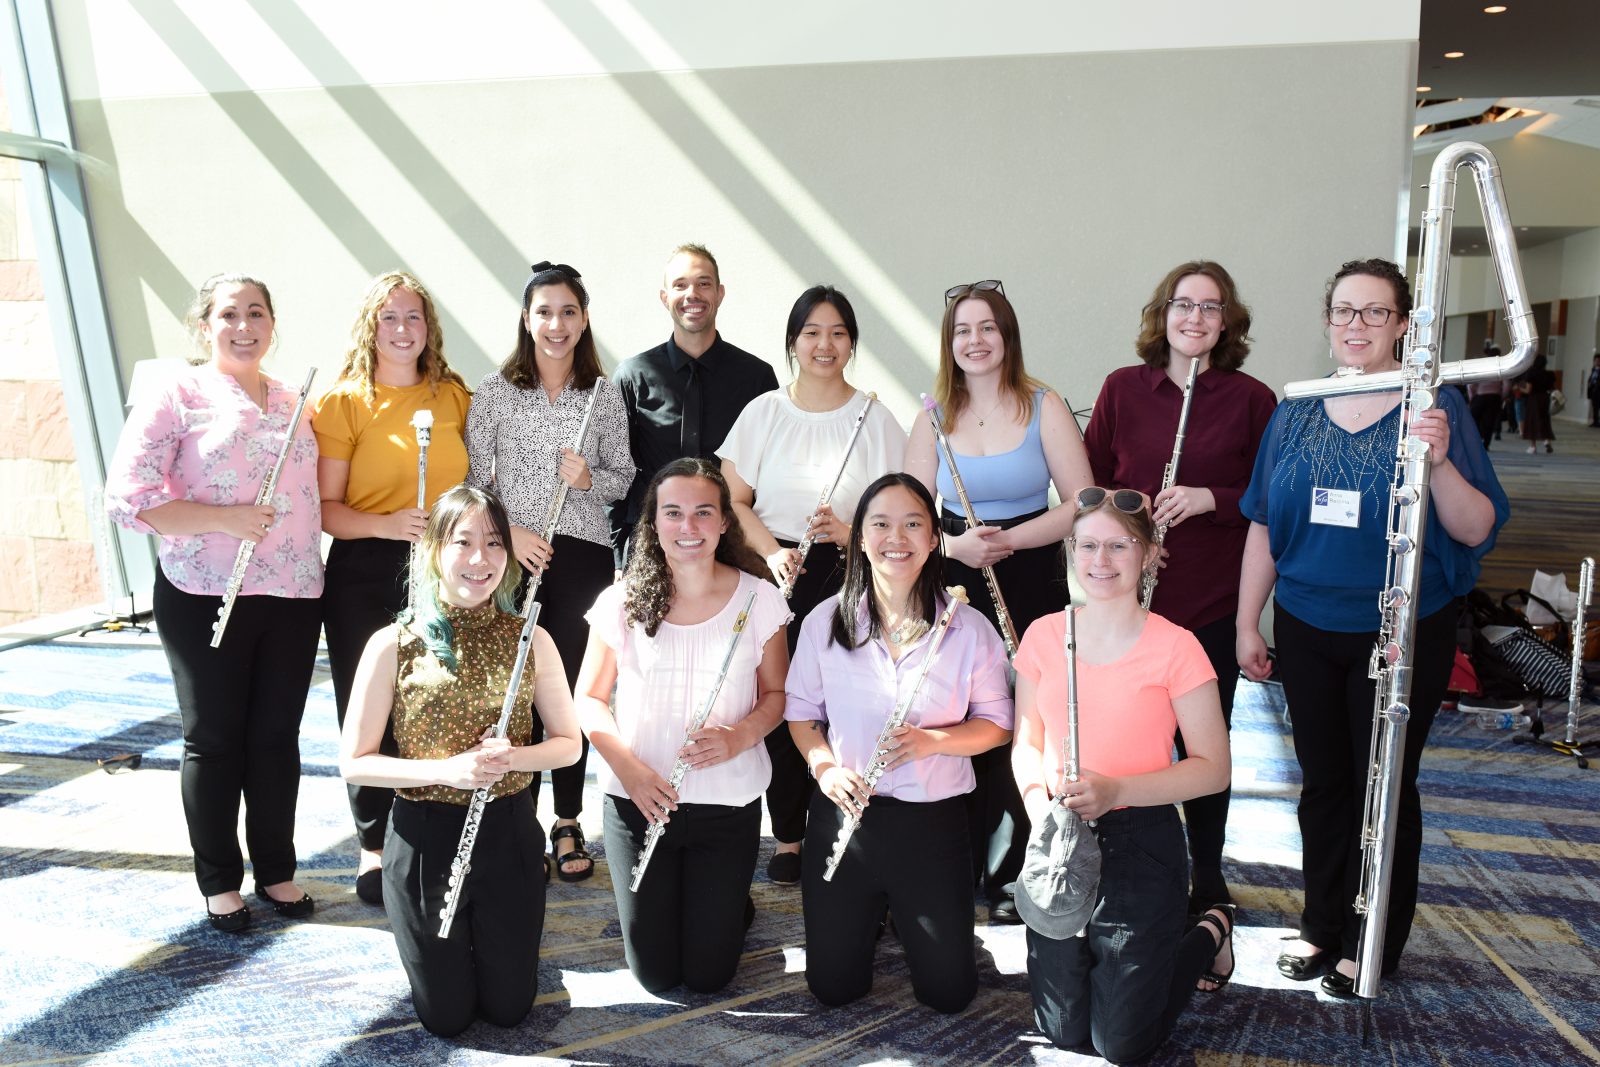 Daniel Parasky with members of the Duquesne University Flute Choir, recipient of the NFA's Mary H. Anderson Collegiate Flute Award credit Tim Trumble